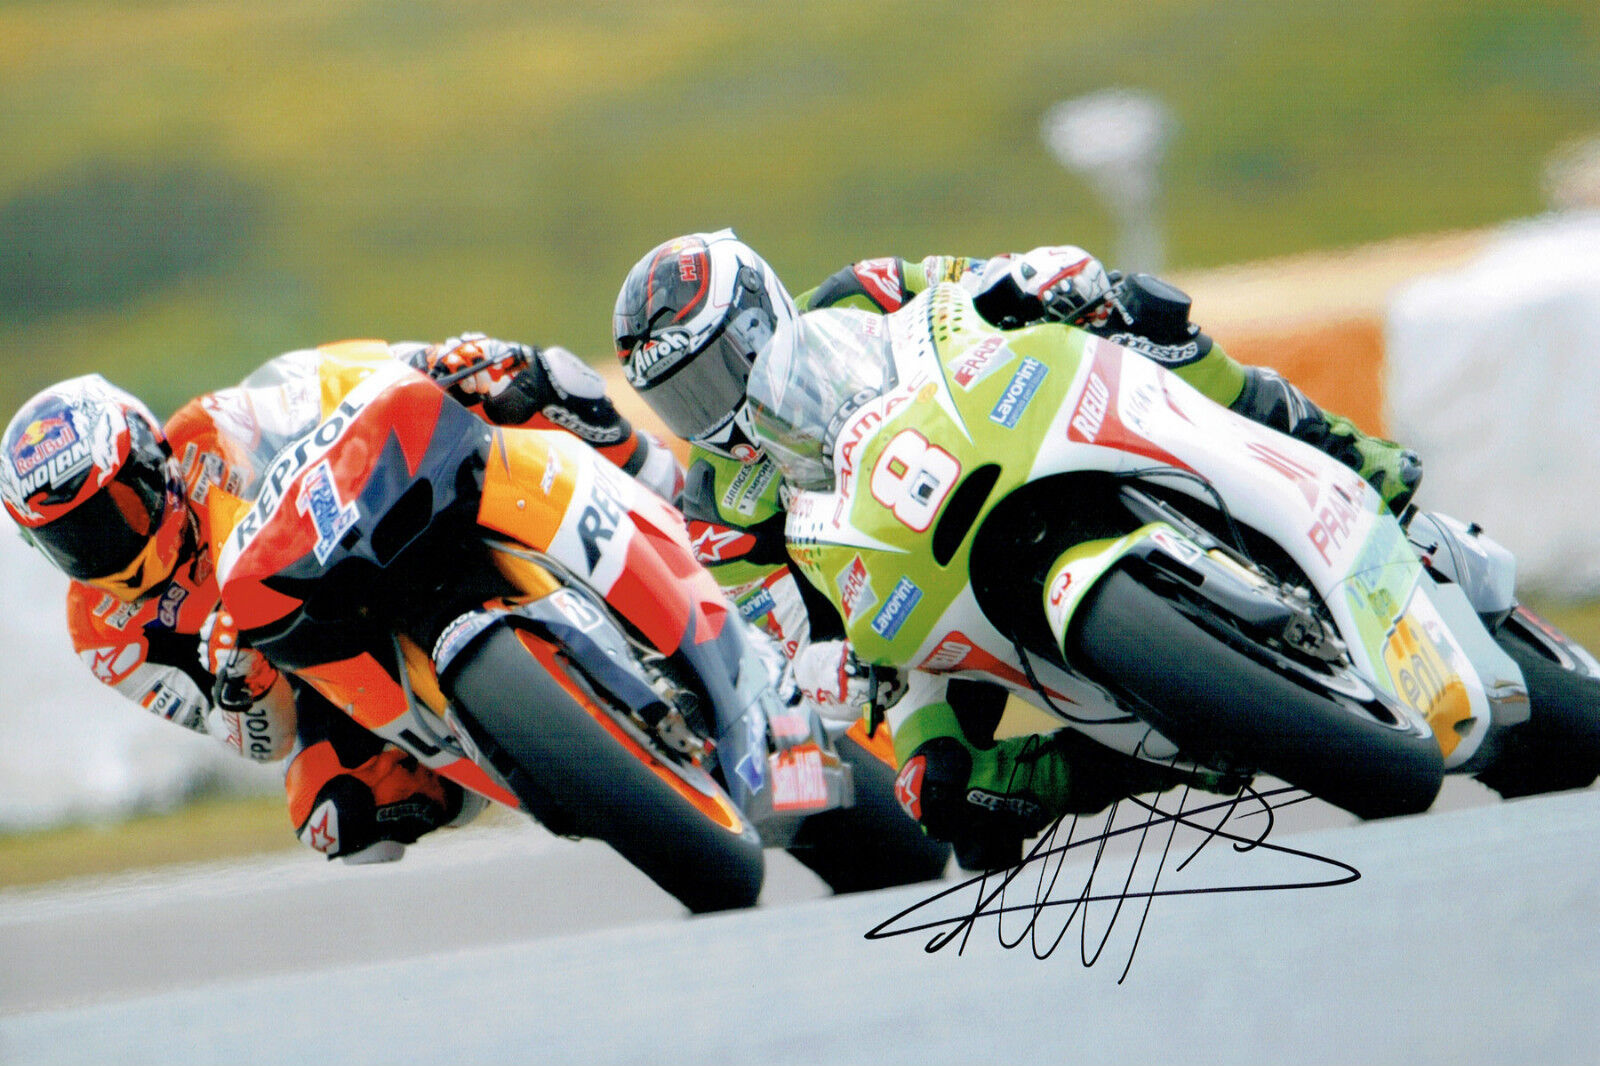 Hector BARBERA with Casey STONER SIGNED MOTOGP Autograph 12x8 Photo Poster painting AFTAL COA